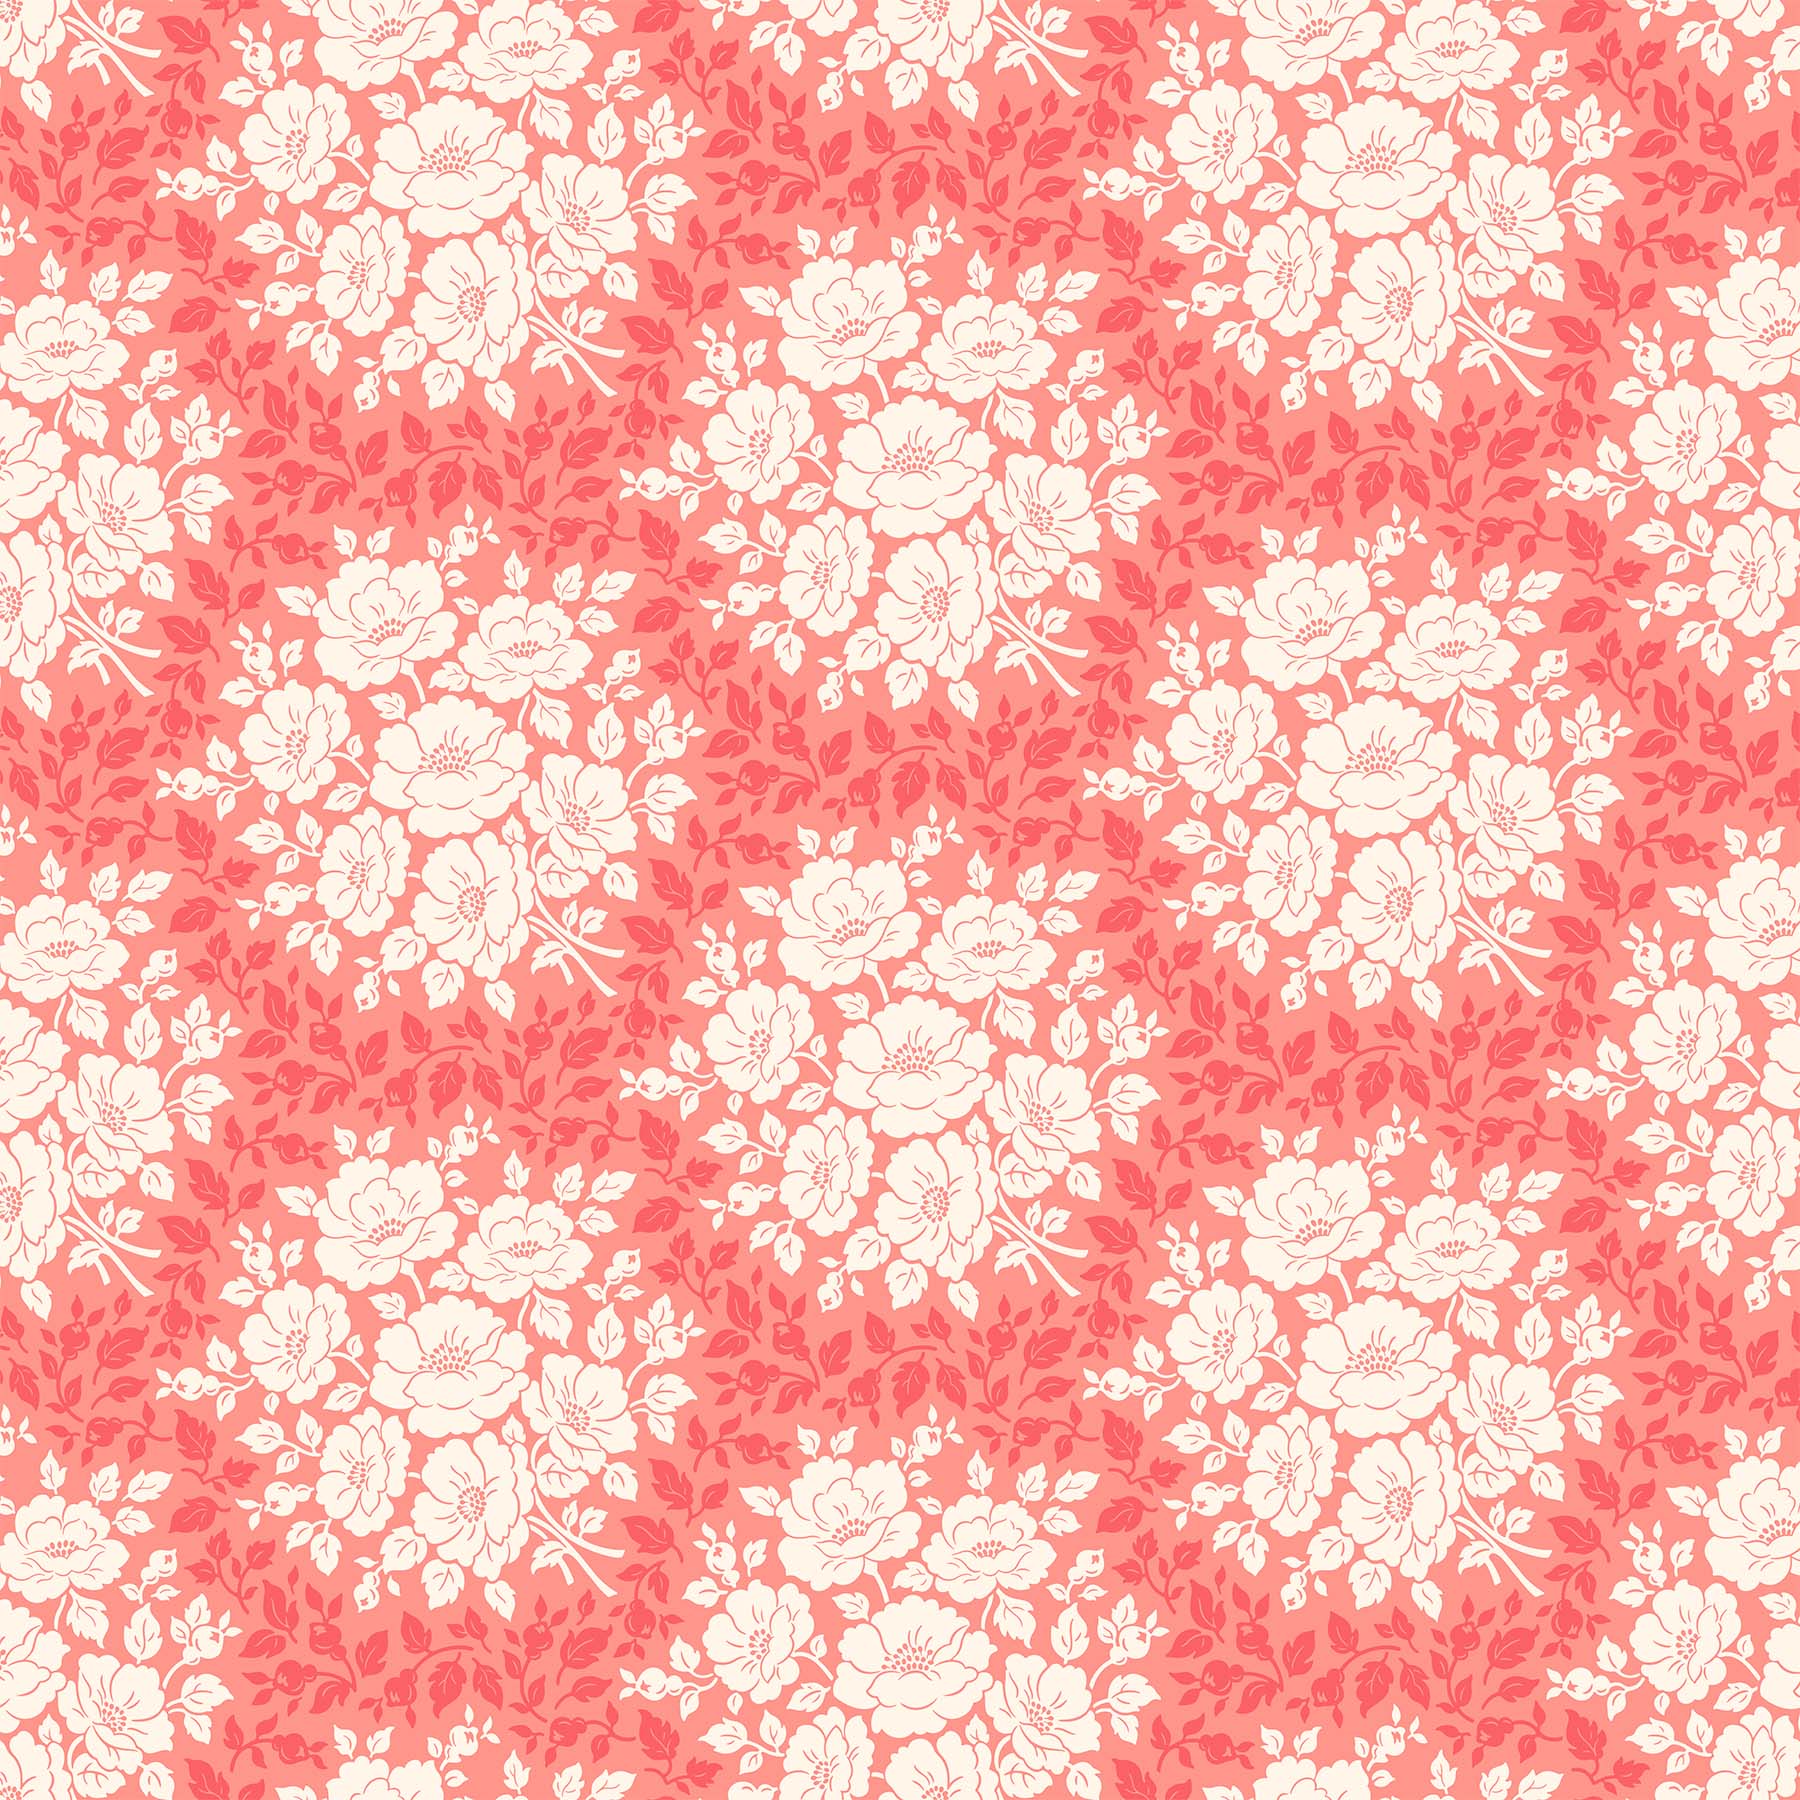 Local Honey Quilt Fabric - Morning Bloom on Coral Pink - 90659-20